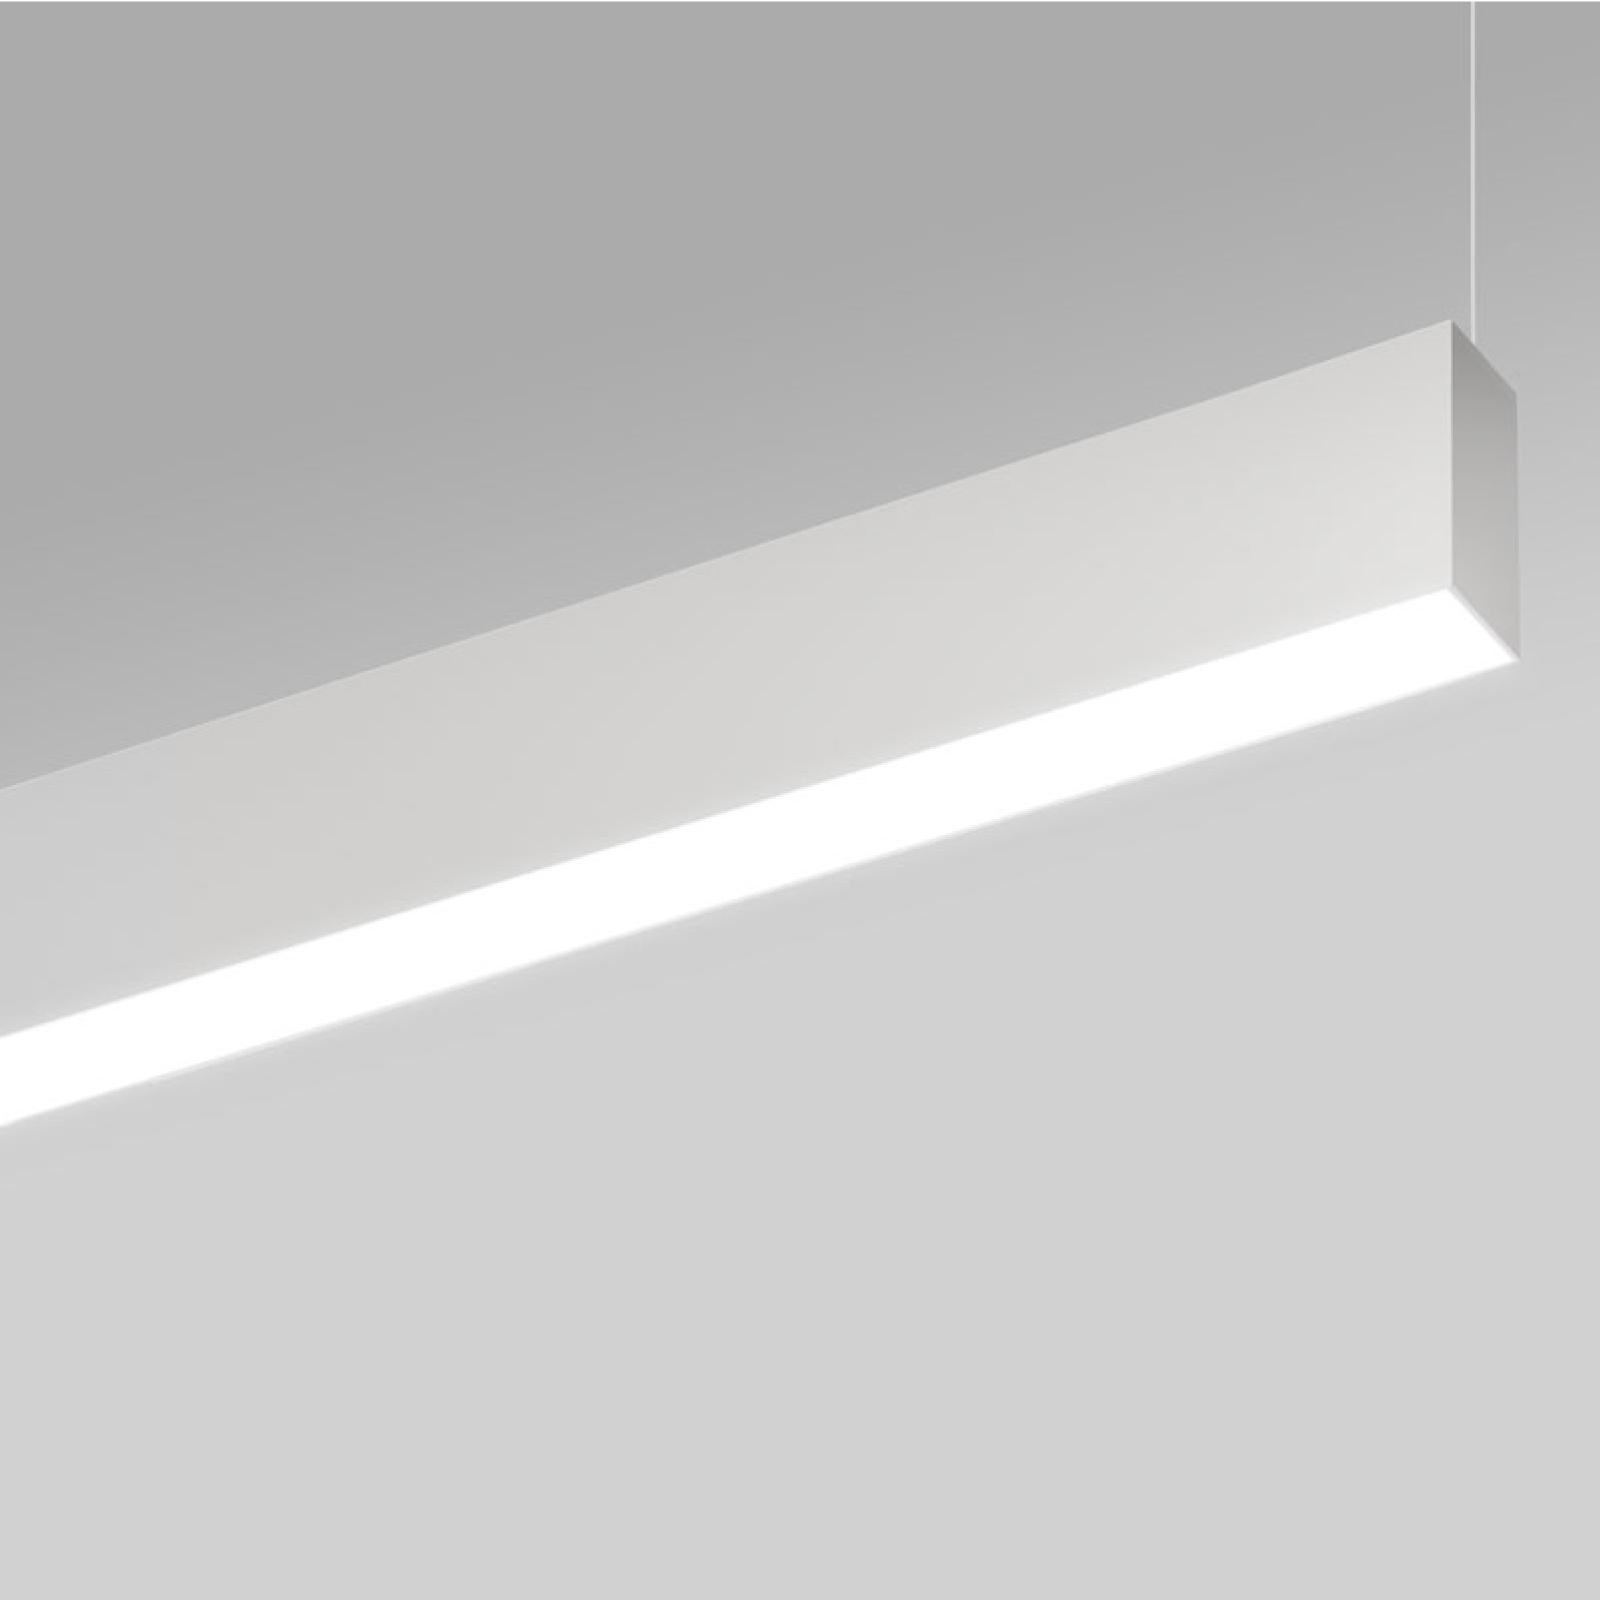 Gallery Rollip Linear Light System Linealightgroup 1200X1200 8